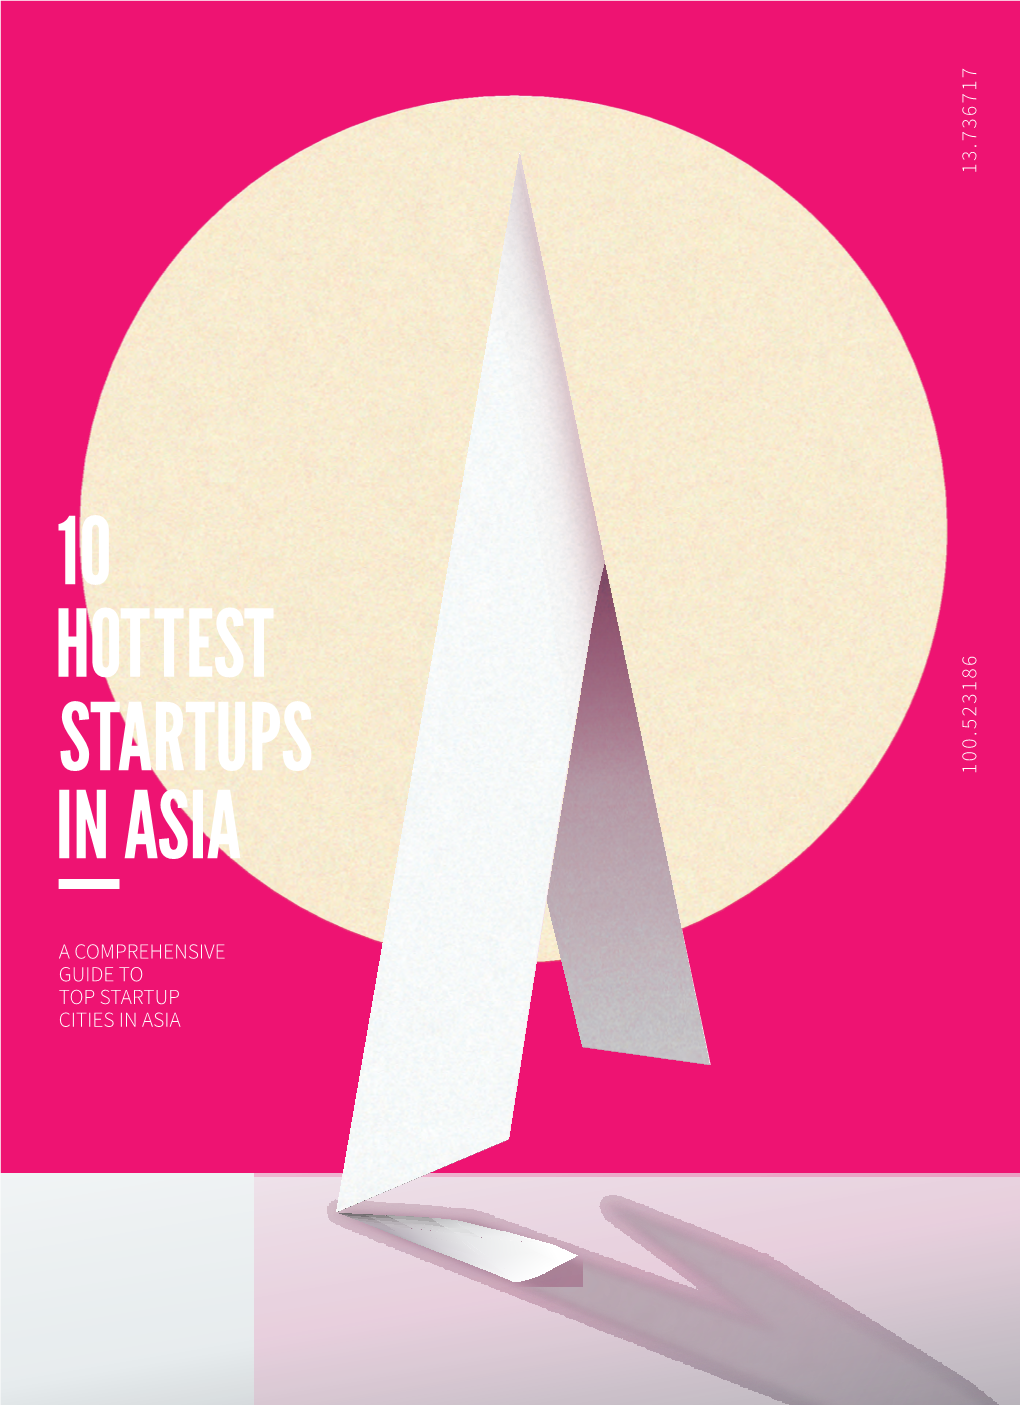 In Asia 10 Hottest Startups in Asia 005